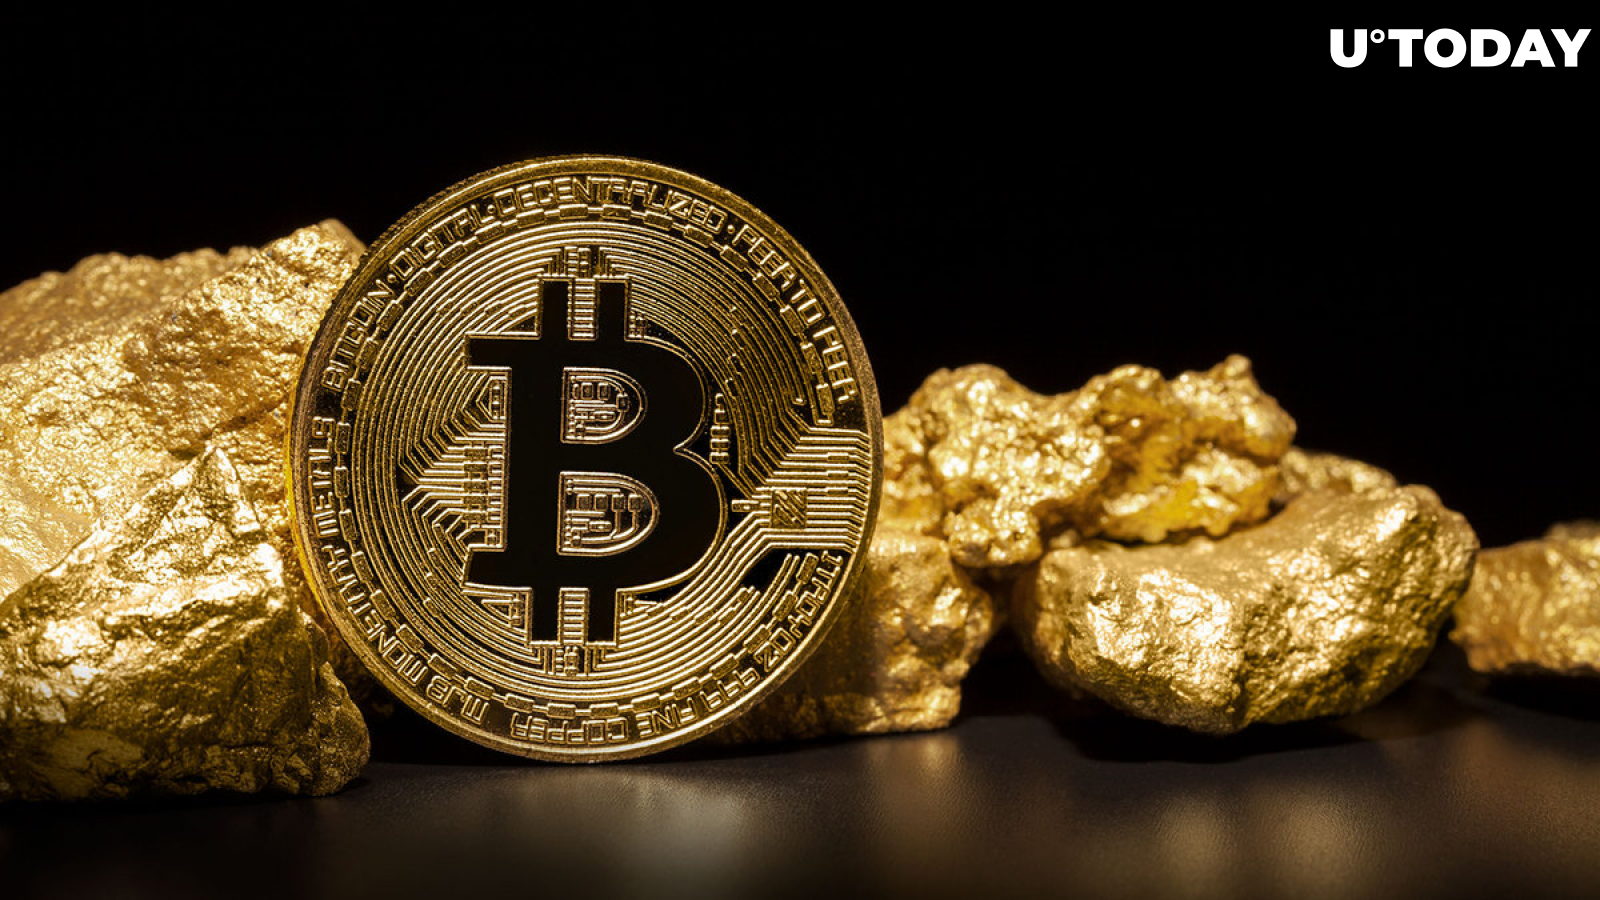 Bitcoin (BTC) Loses 30% to Gold